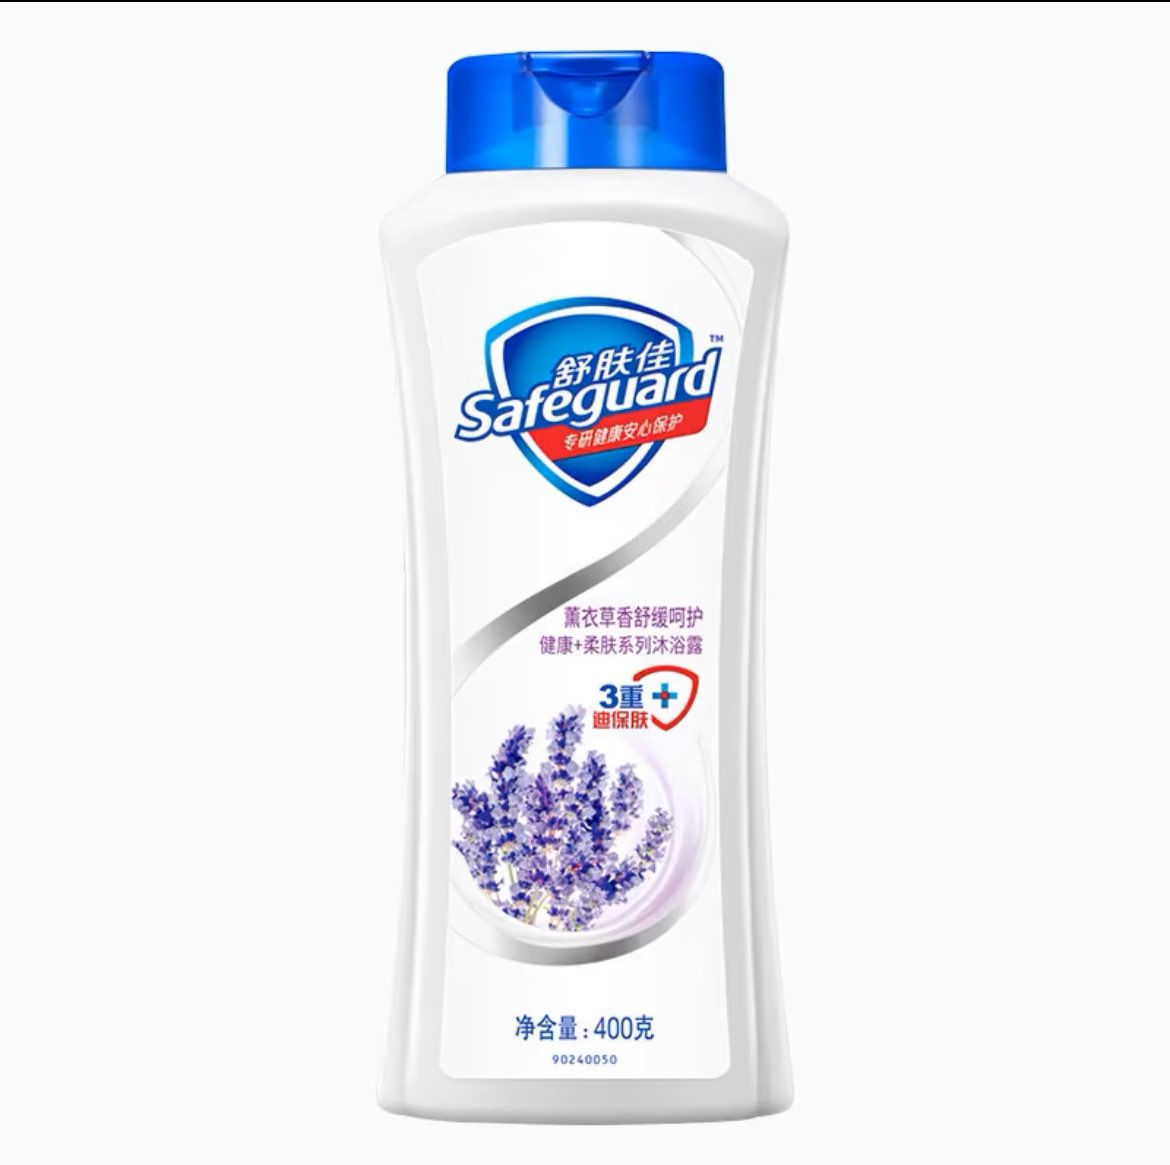 Safeguard Lavender Scent Rich Foam Body Wash Pure White Faint Scent Refreshing Protects Skin 400g/ Bottle